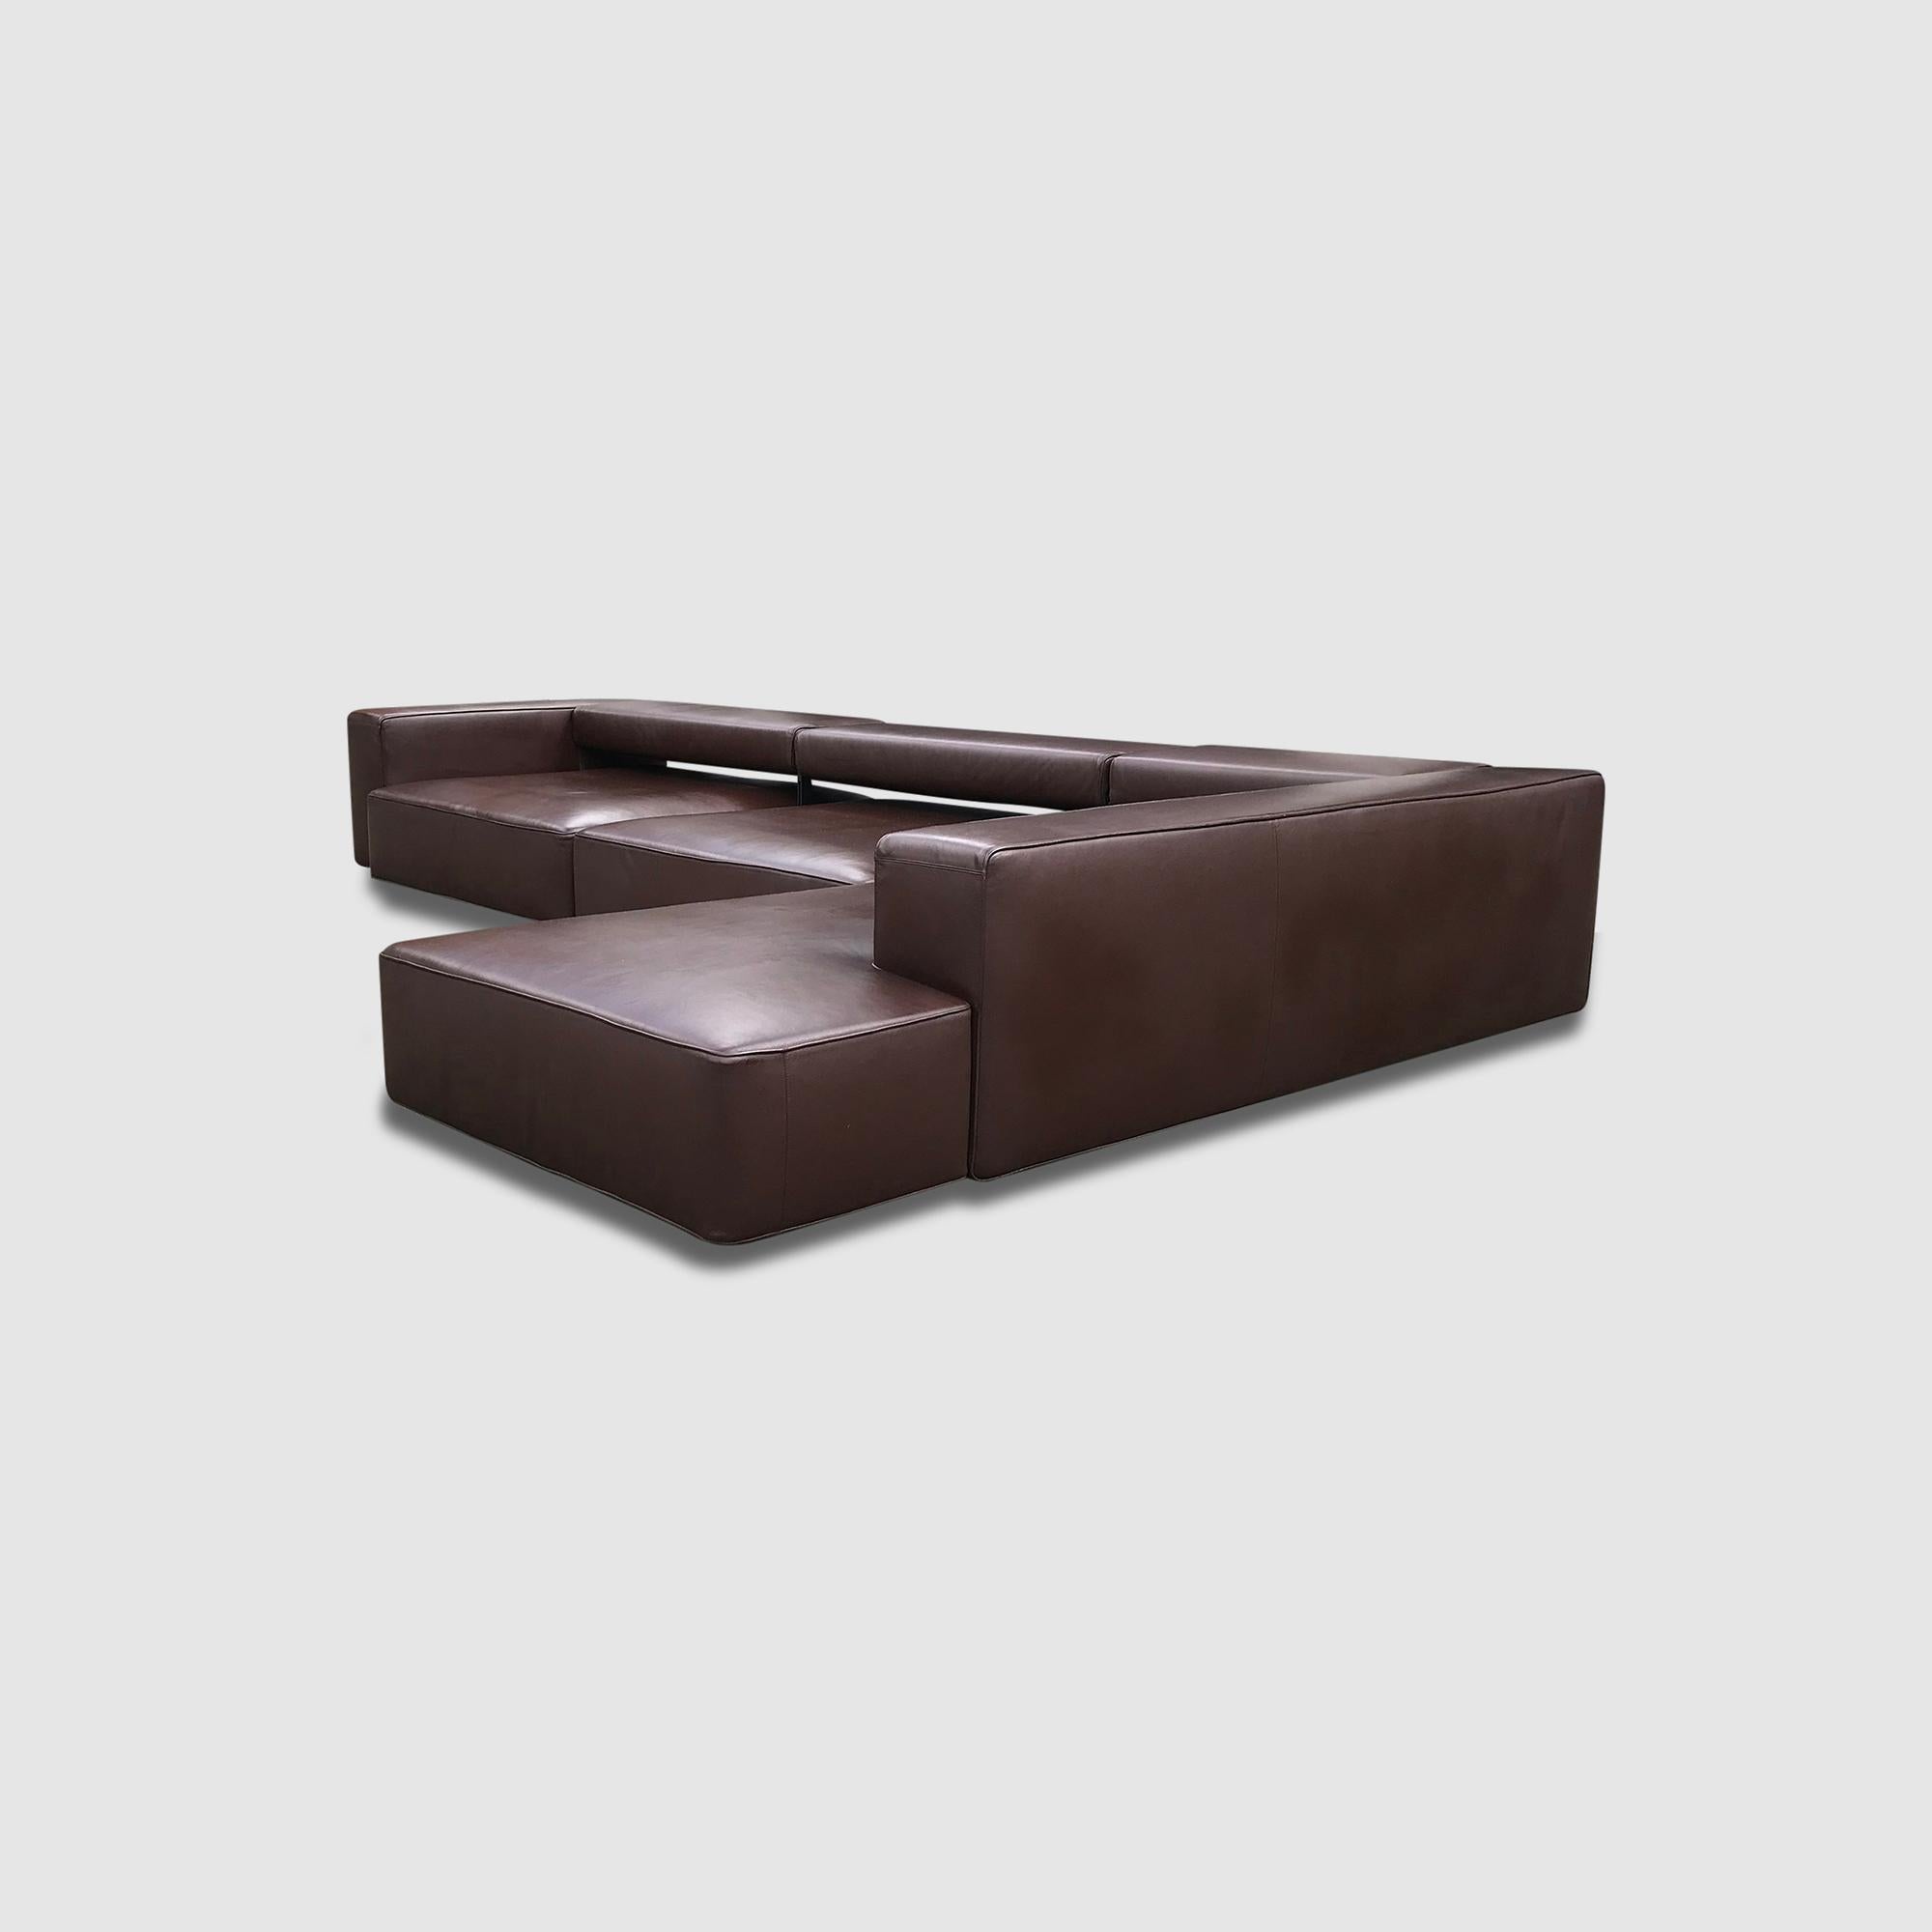 Modular Leather Andy Landscape Sofa by Paolo Piva for B&B Italia 2013 12